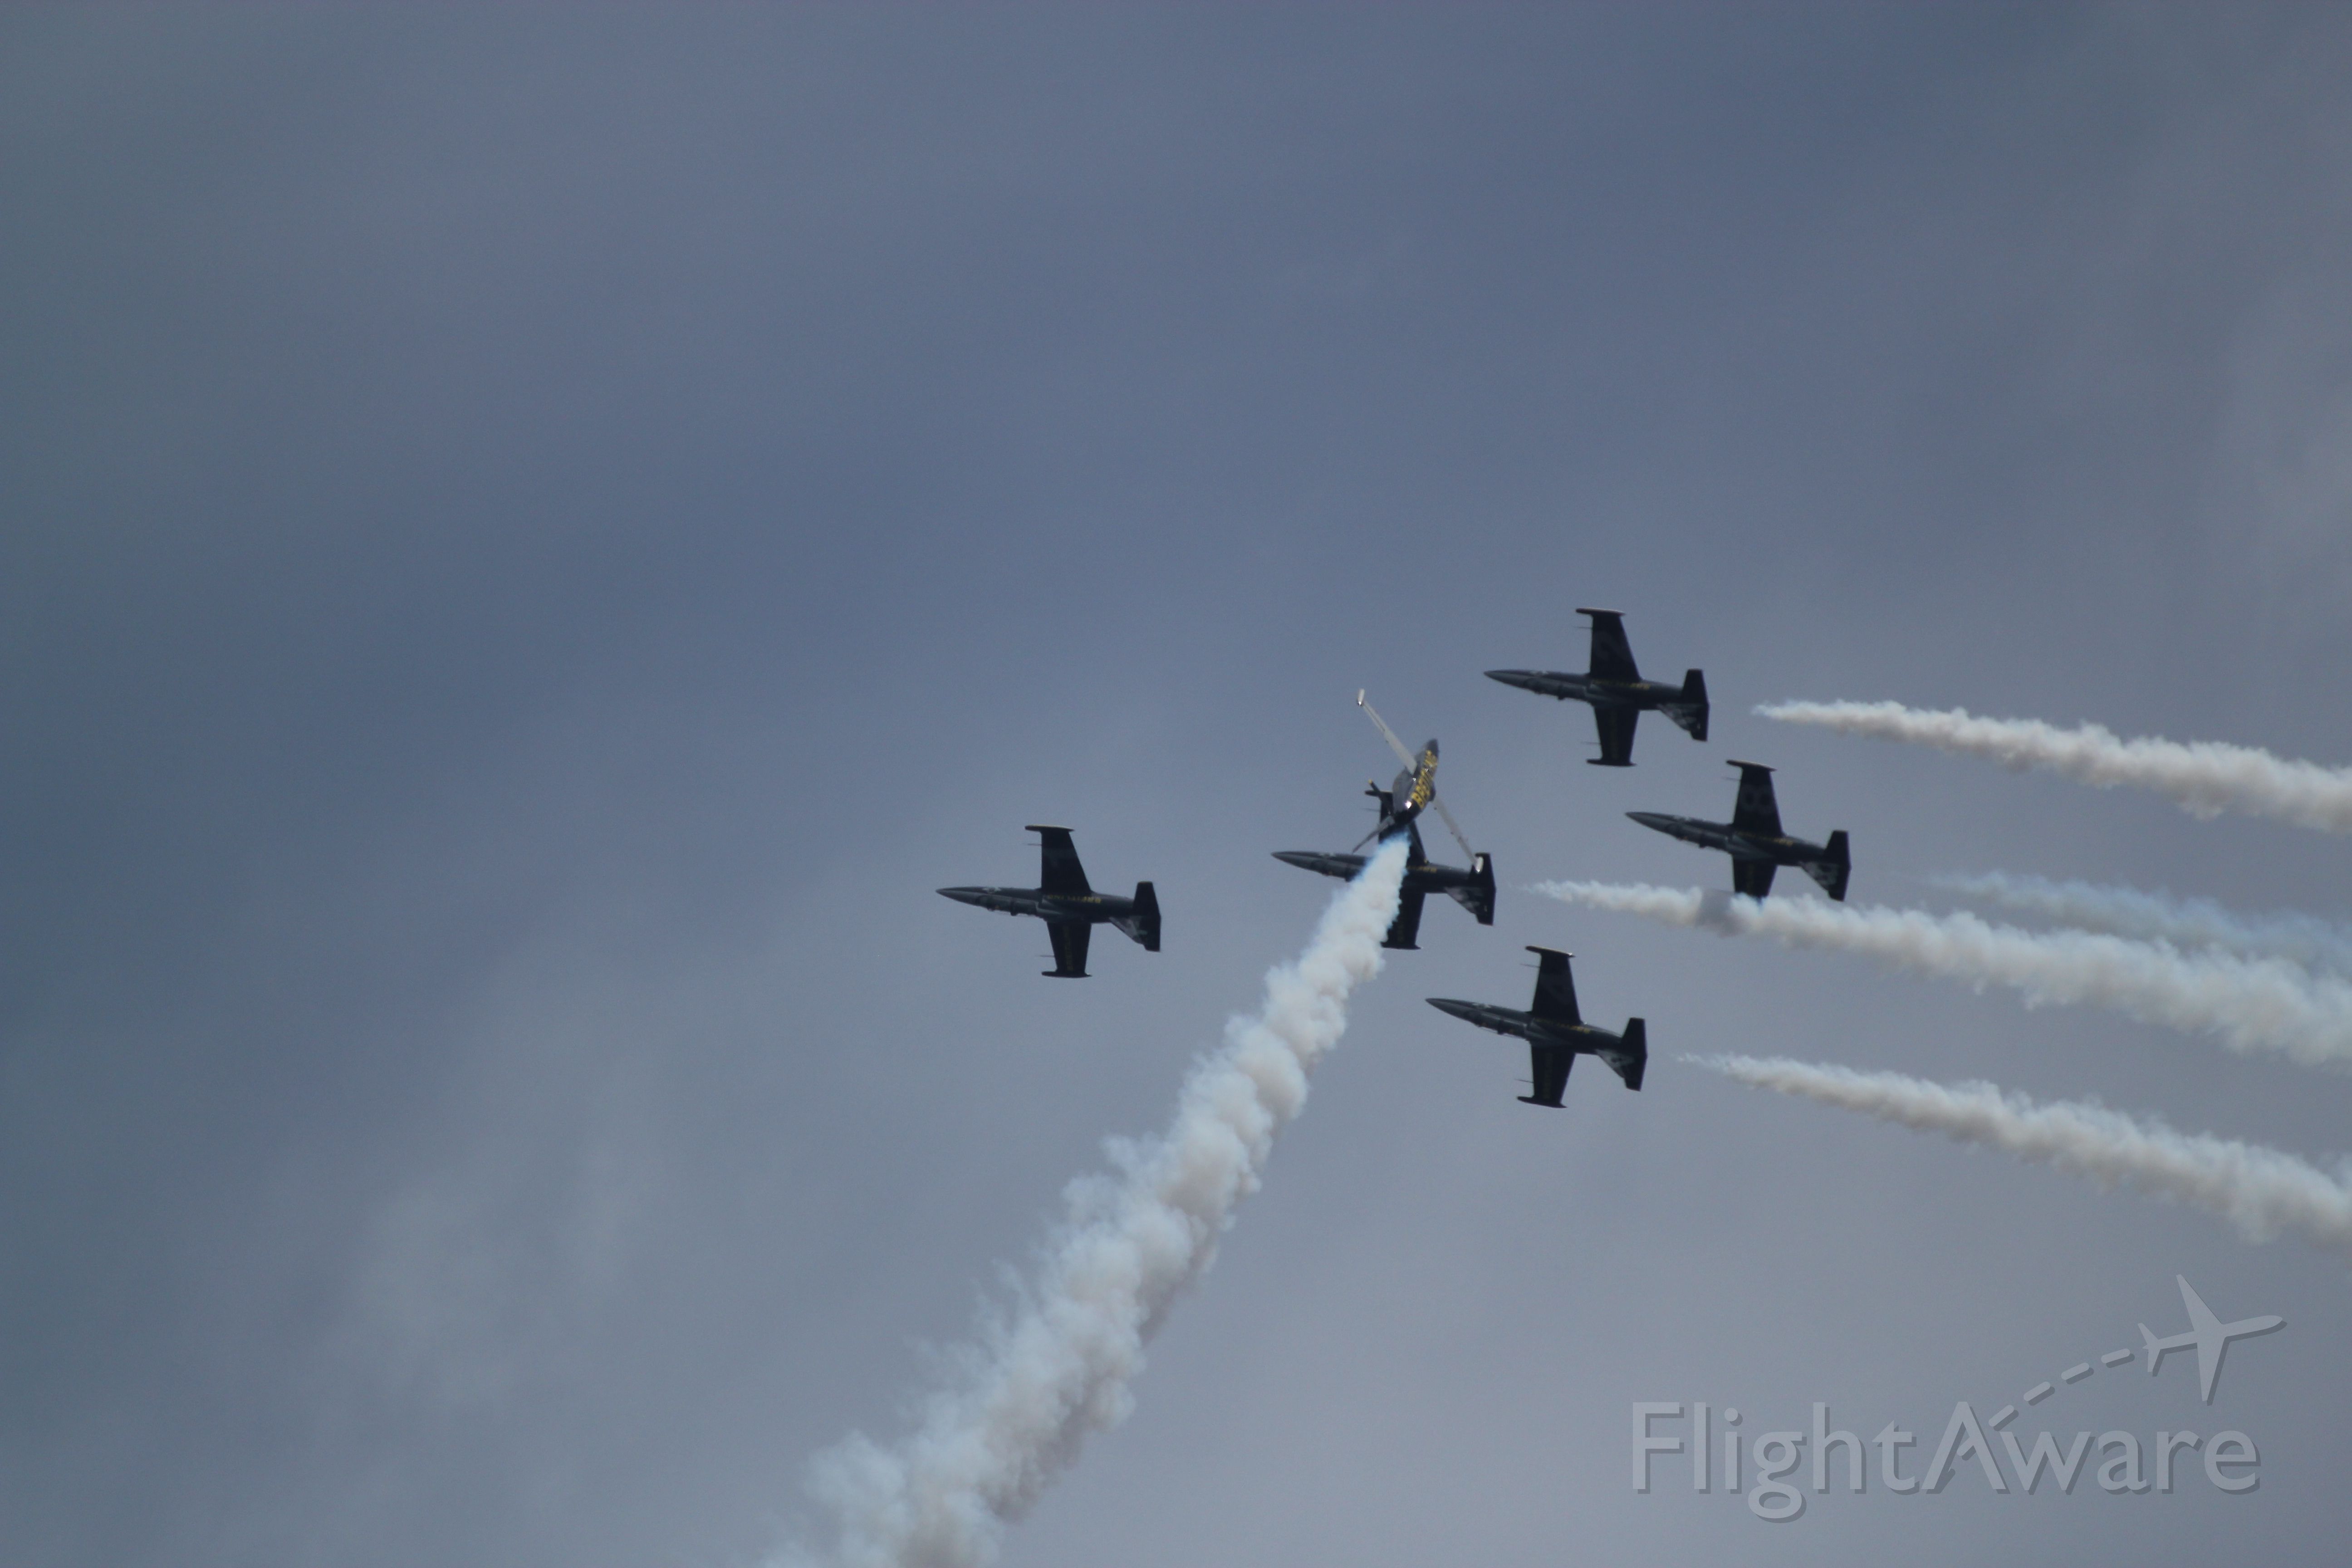 — — - Breitling air performers at the Beth Page Air Show Long Island, NY May, 2015.